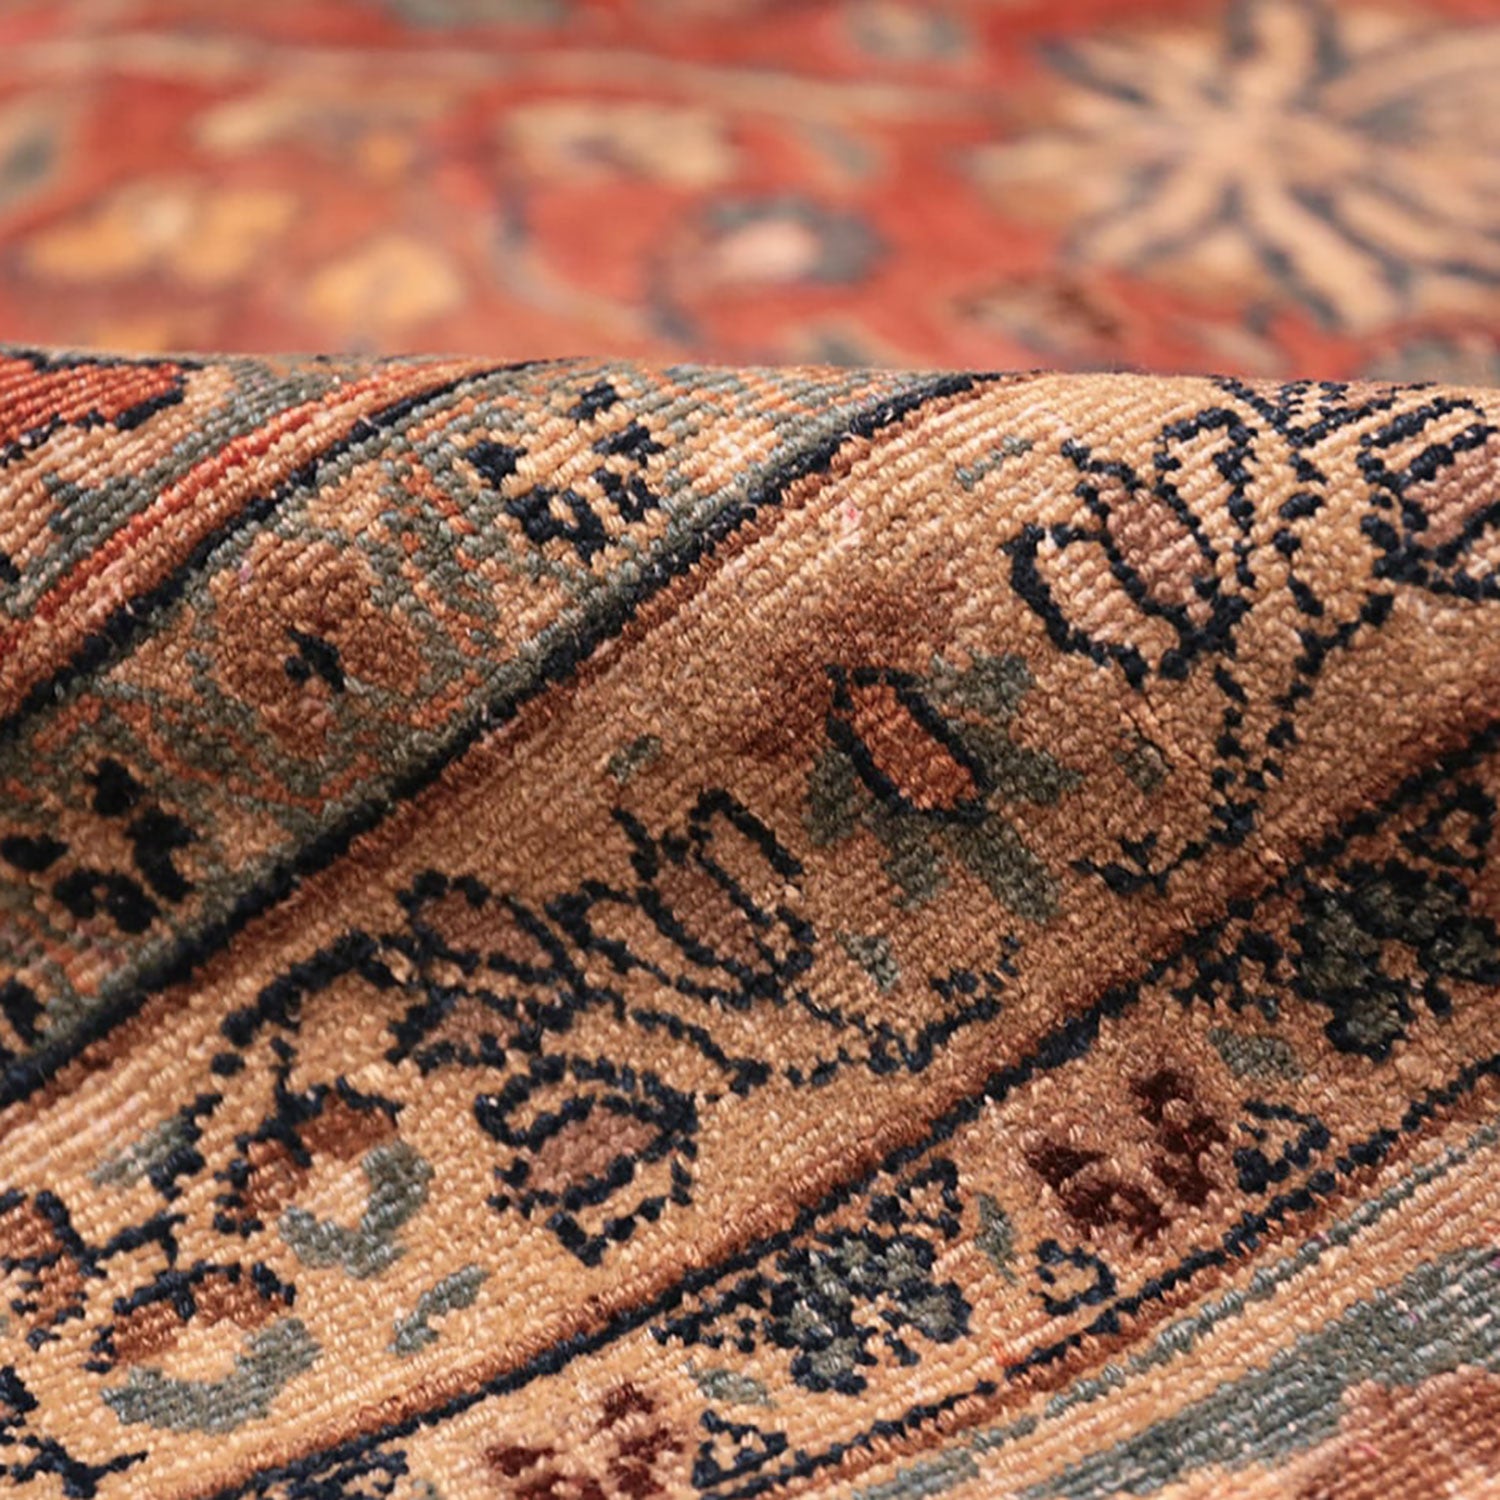 Close-up of a folded, patterned rug showcasing intricate details.